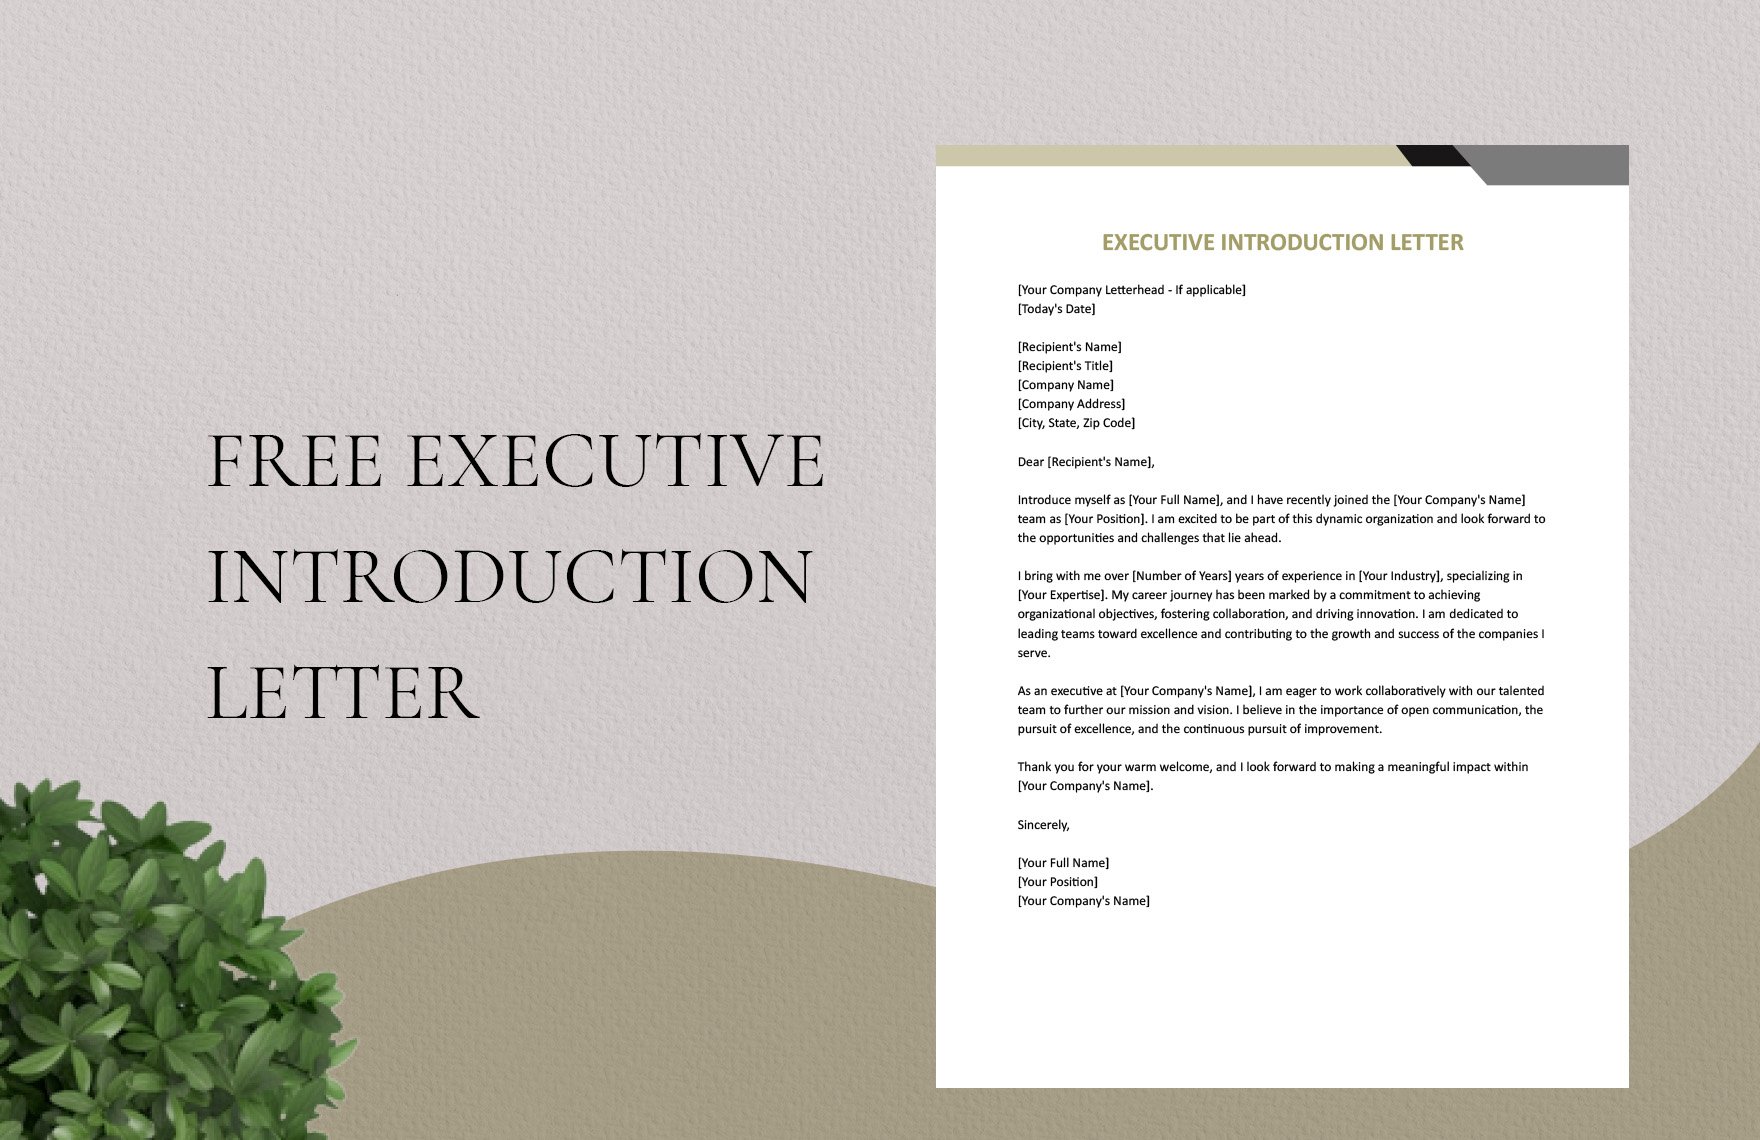 Executive Introduction Letter